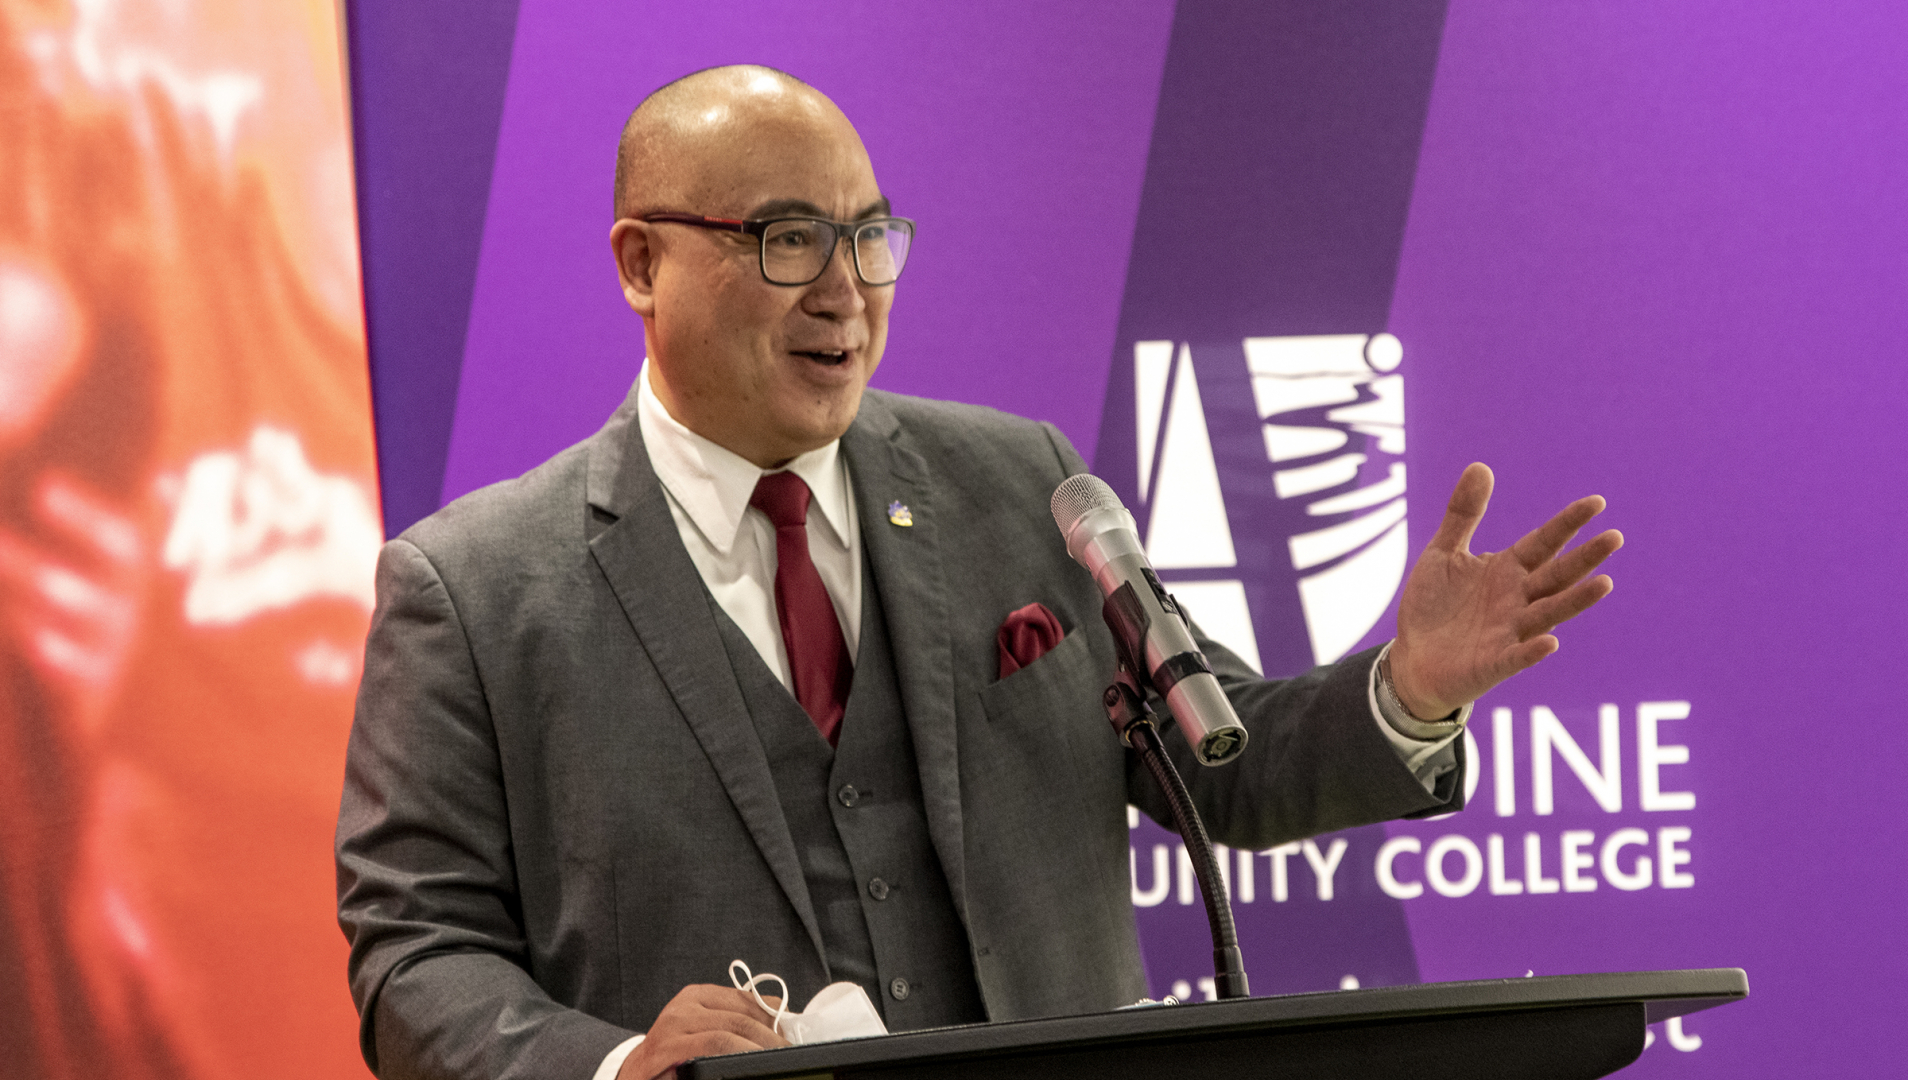 The Honourable Jon Reyes, Minister of Advanced Education, Skills and Immigration stand at a podium, speaking into a microphone and gesturing toward the crowd out of frame. 